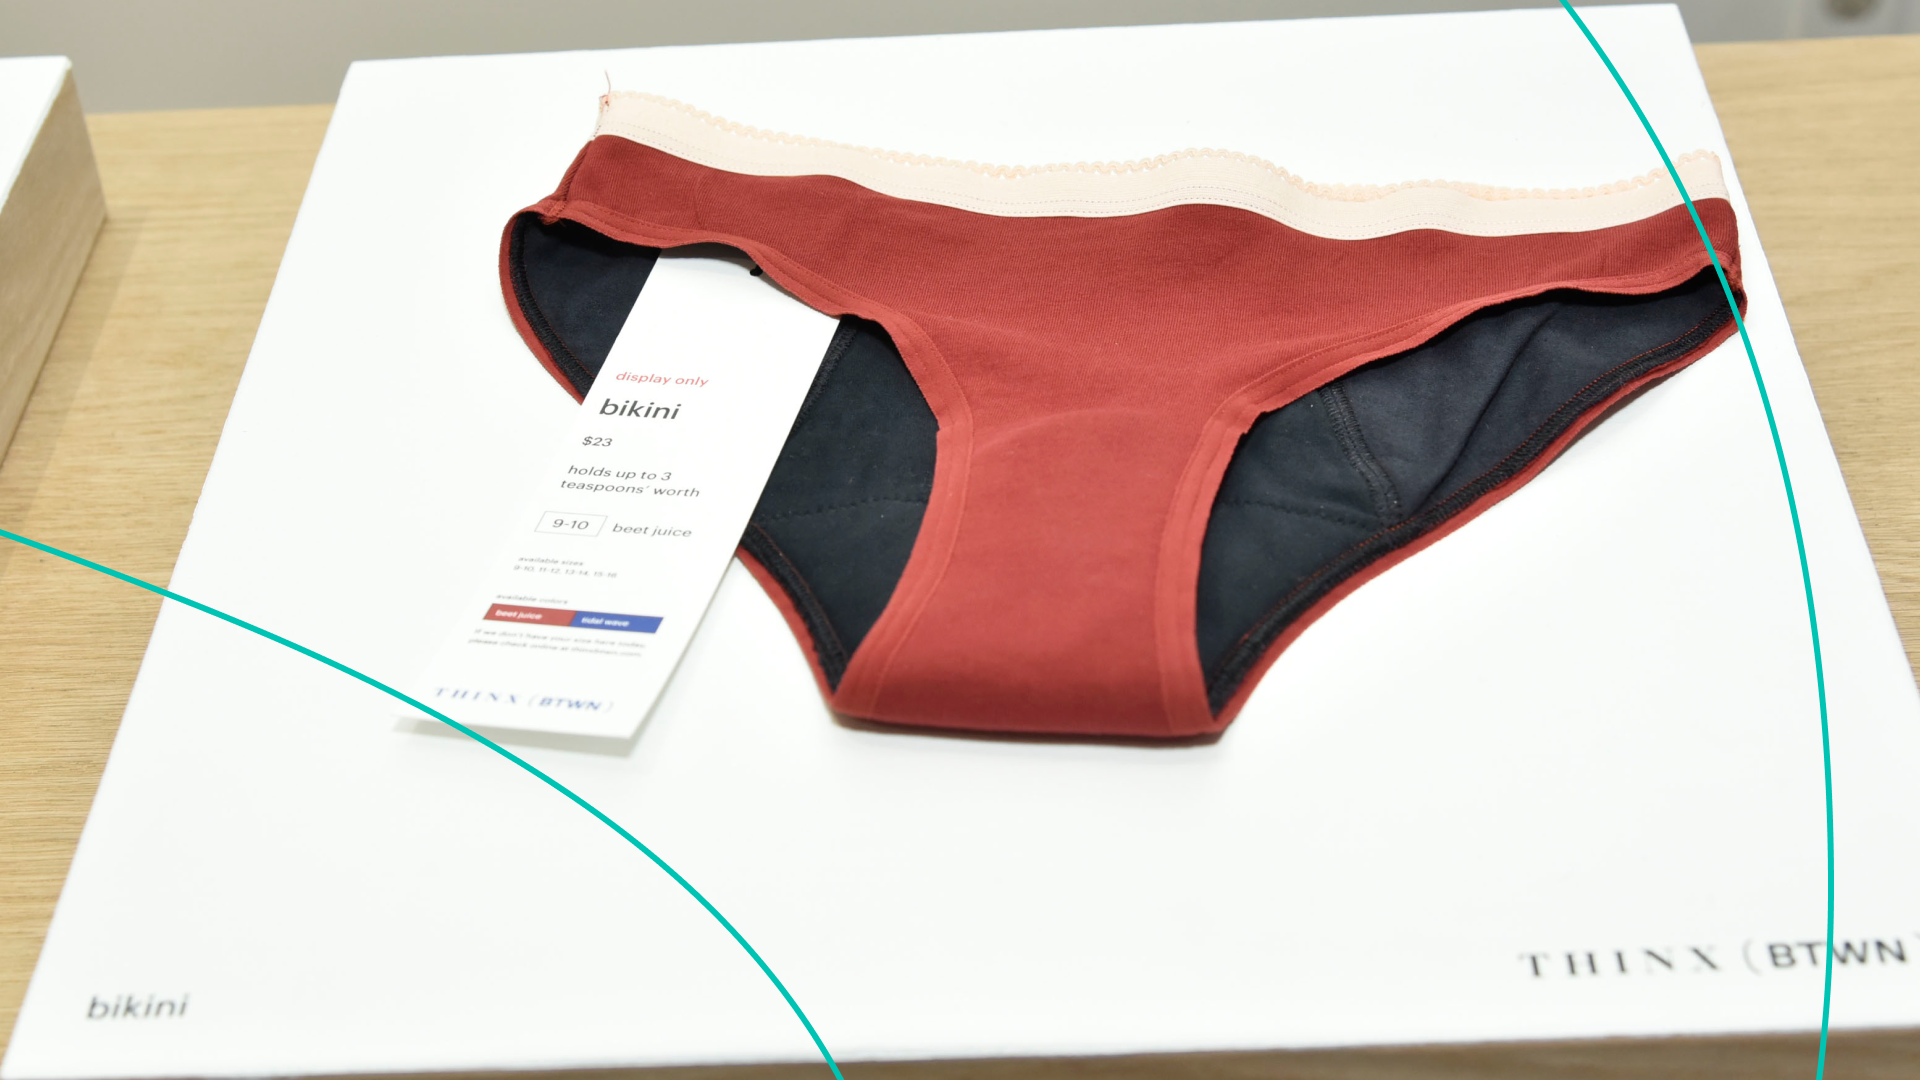 News - What is menstrual pants?